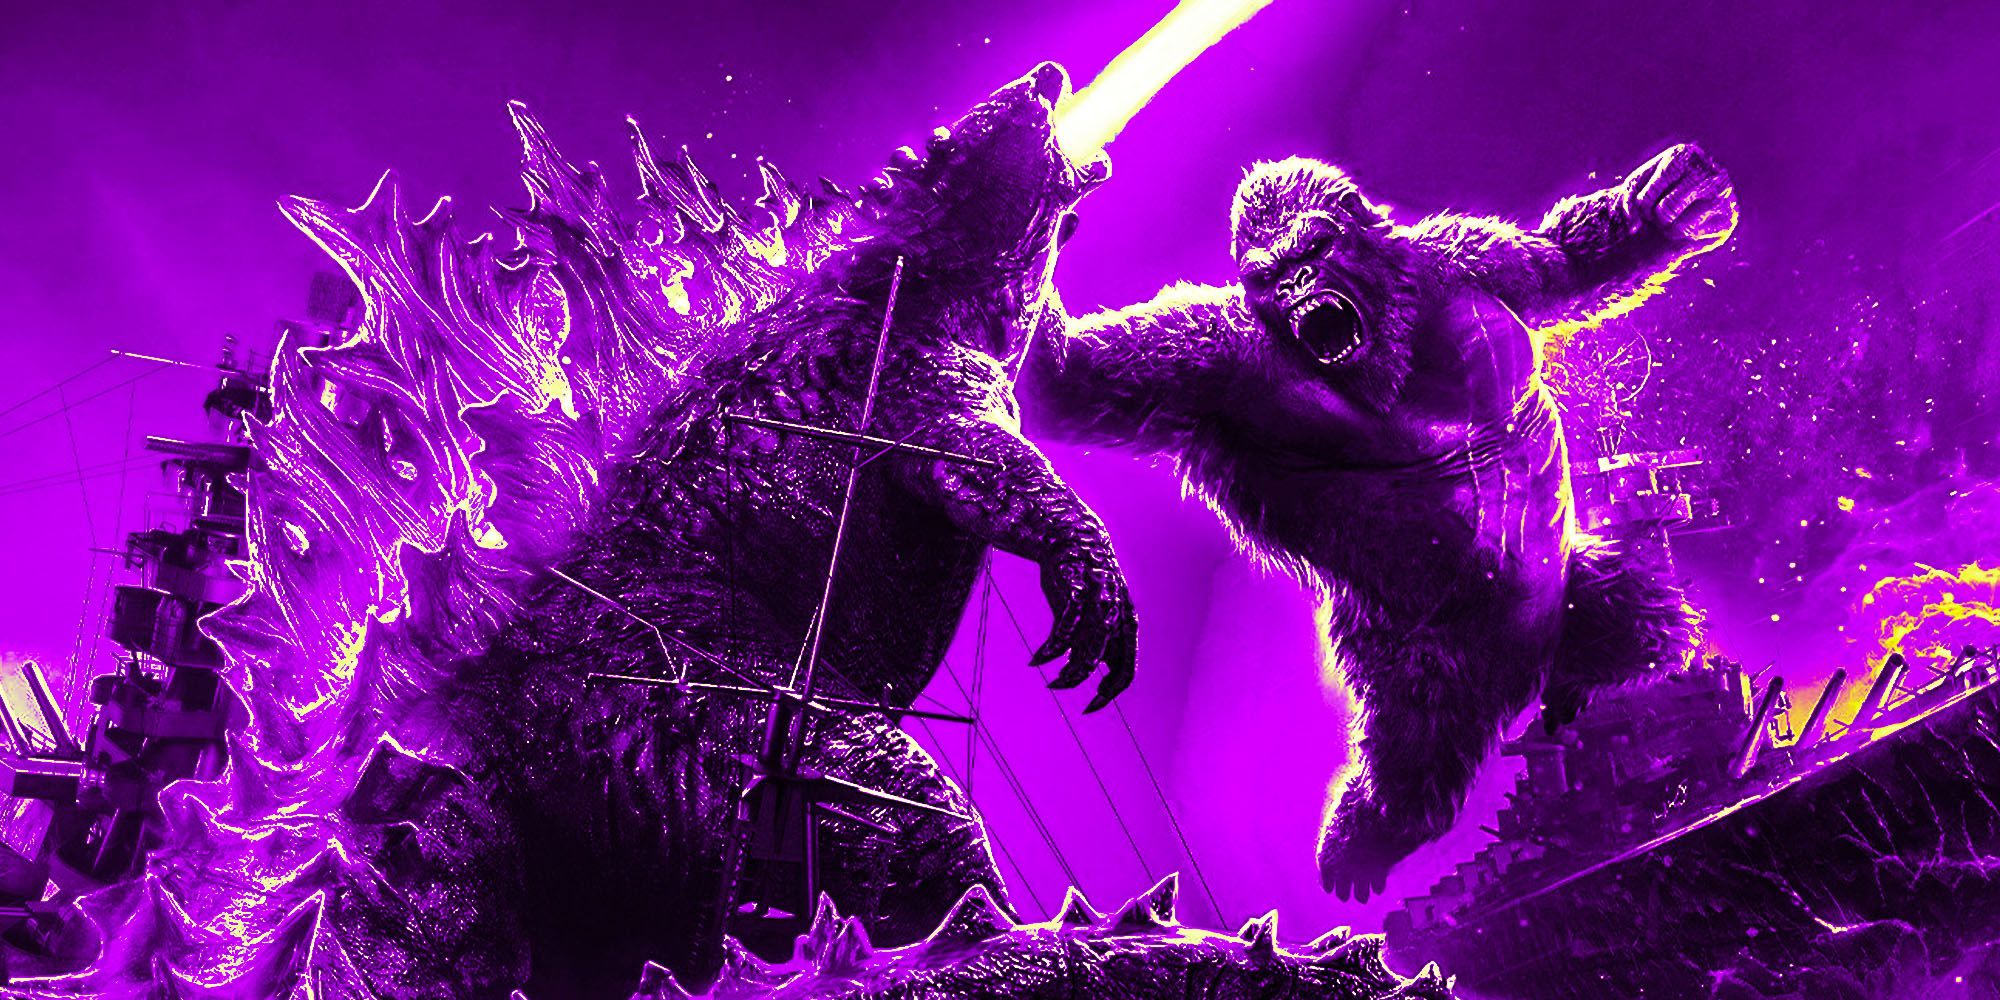 Godzilla vs Kong Just Changed Why They're Fighting (For the Worse)